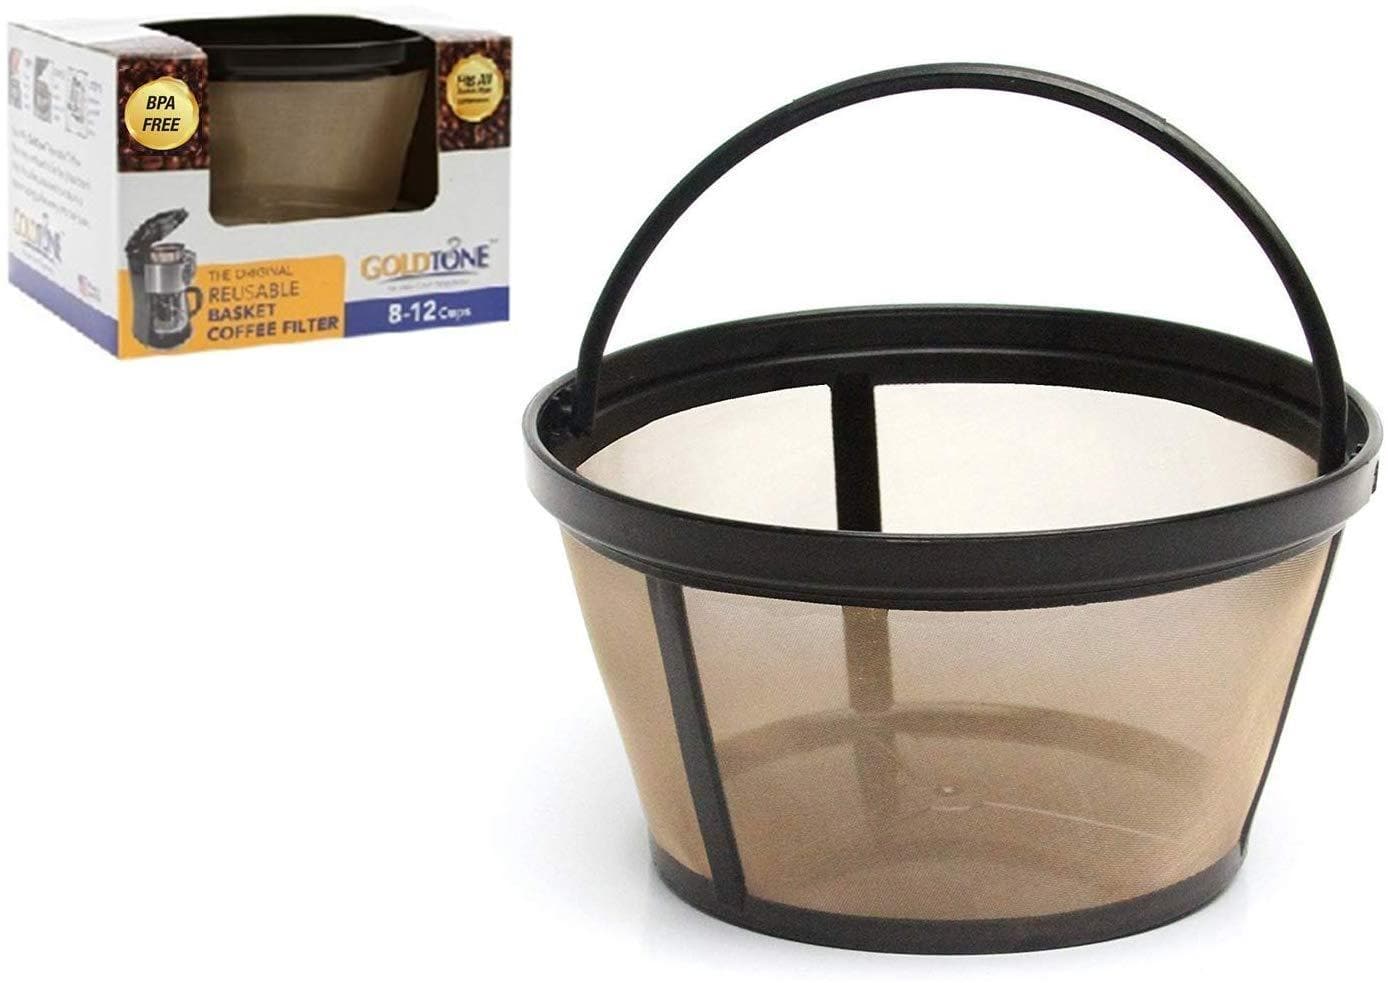 BLACK+DECKER DLX1050B 12-Cup Programmable Coffeemaker & GOLDTONE Reusable  8-12 Cup Basket Coffee Filter fits Mr. Coffee Makers and Brewers, Replaces